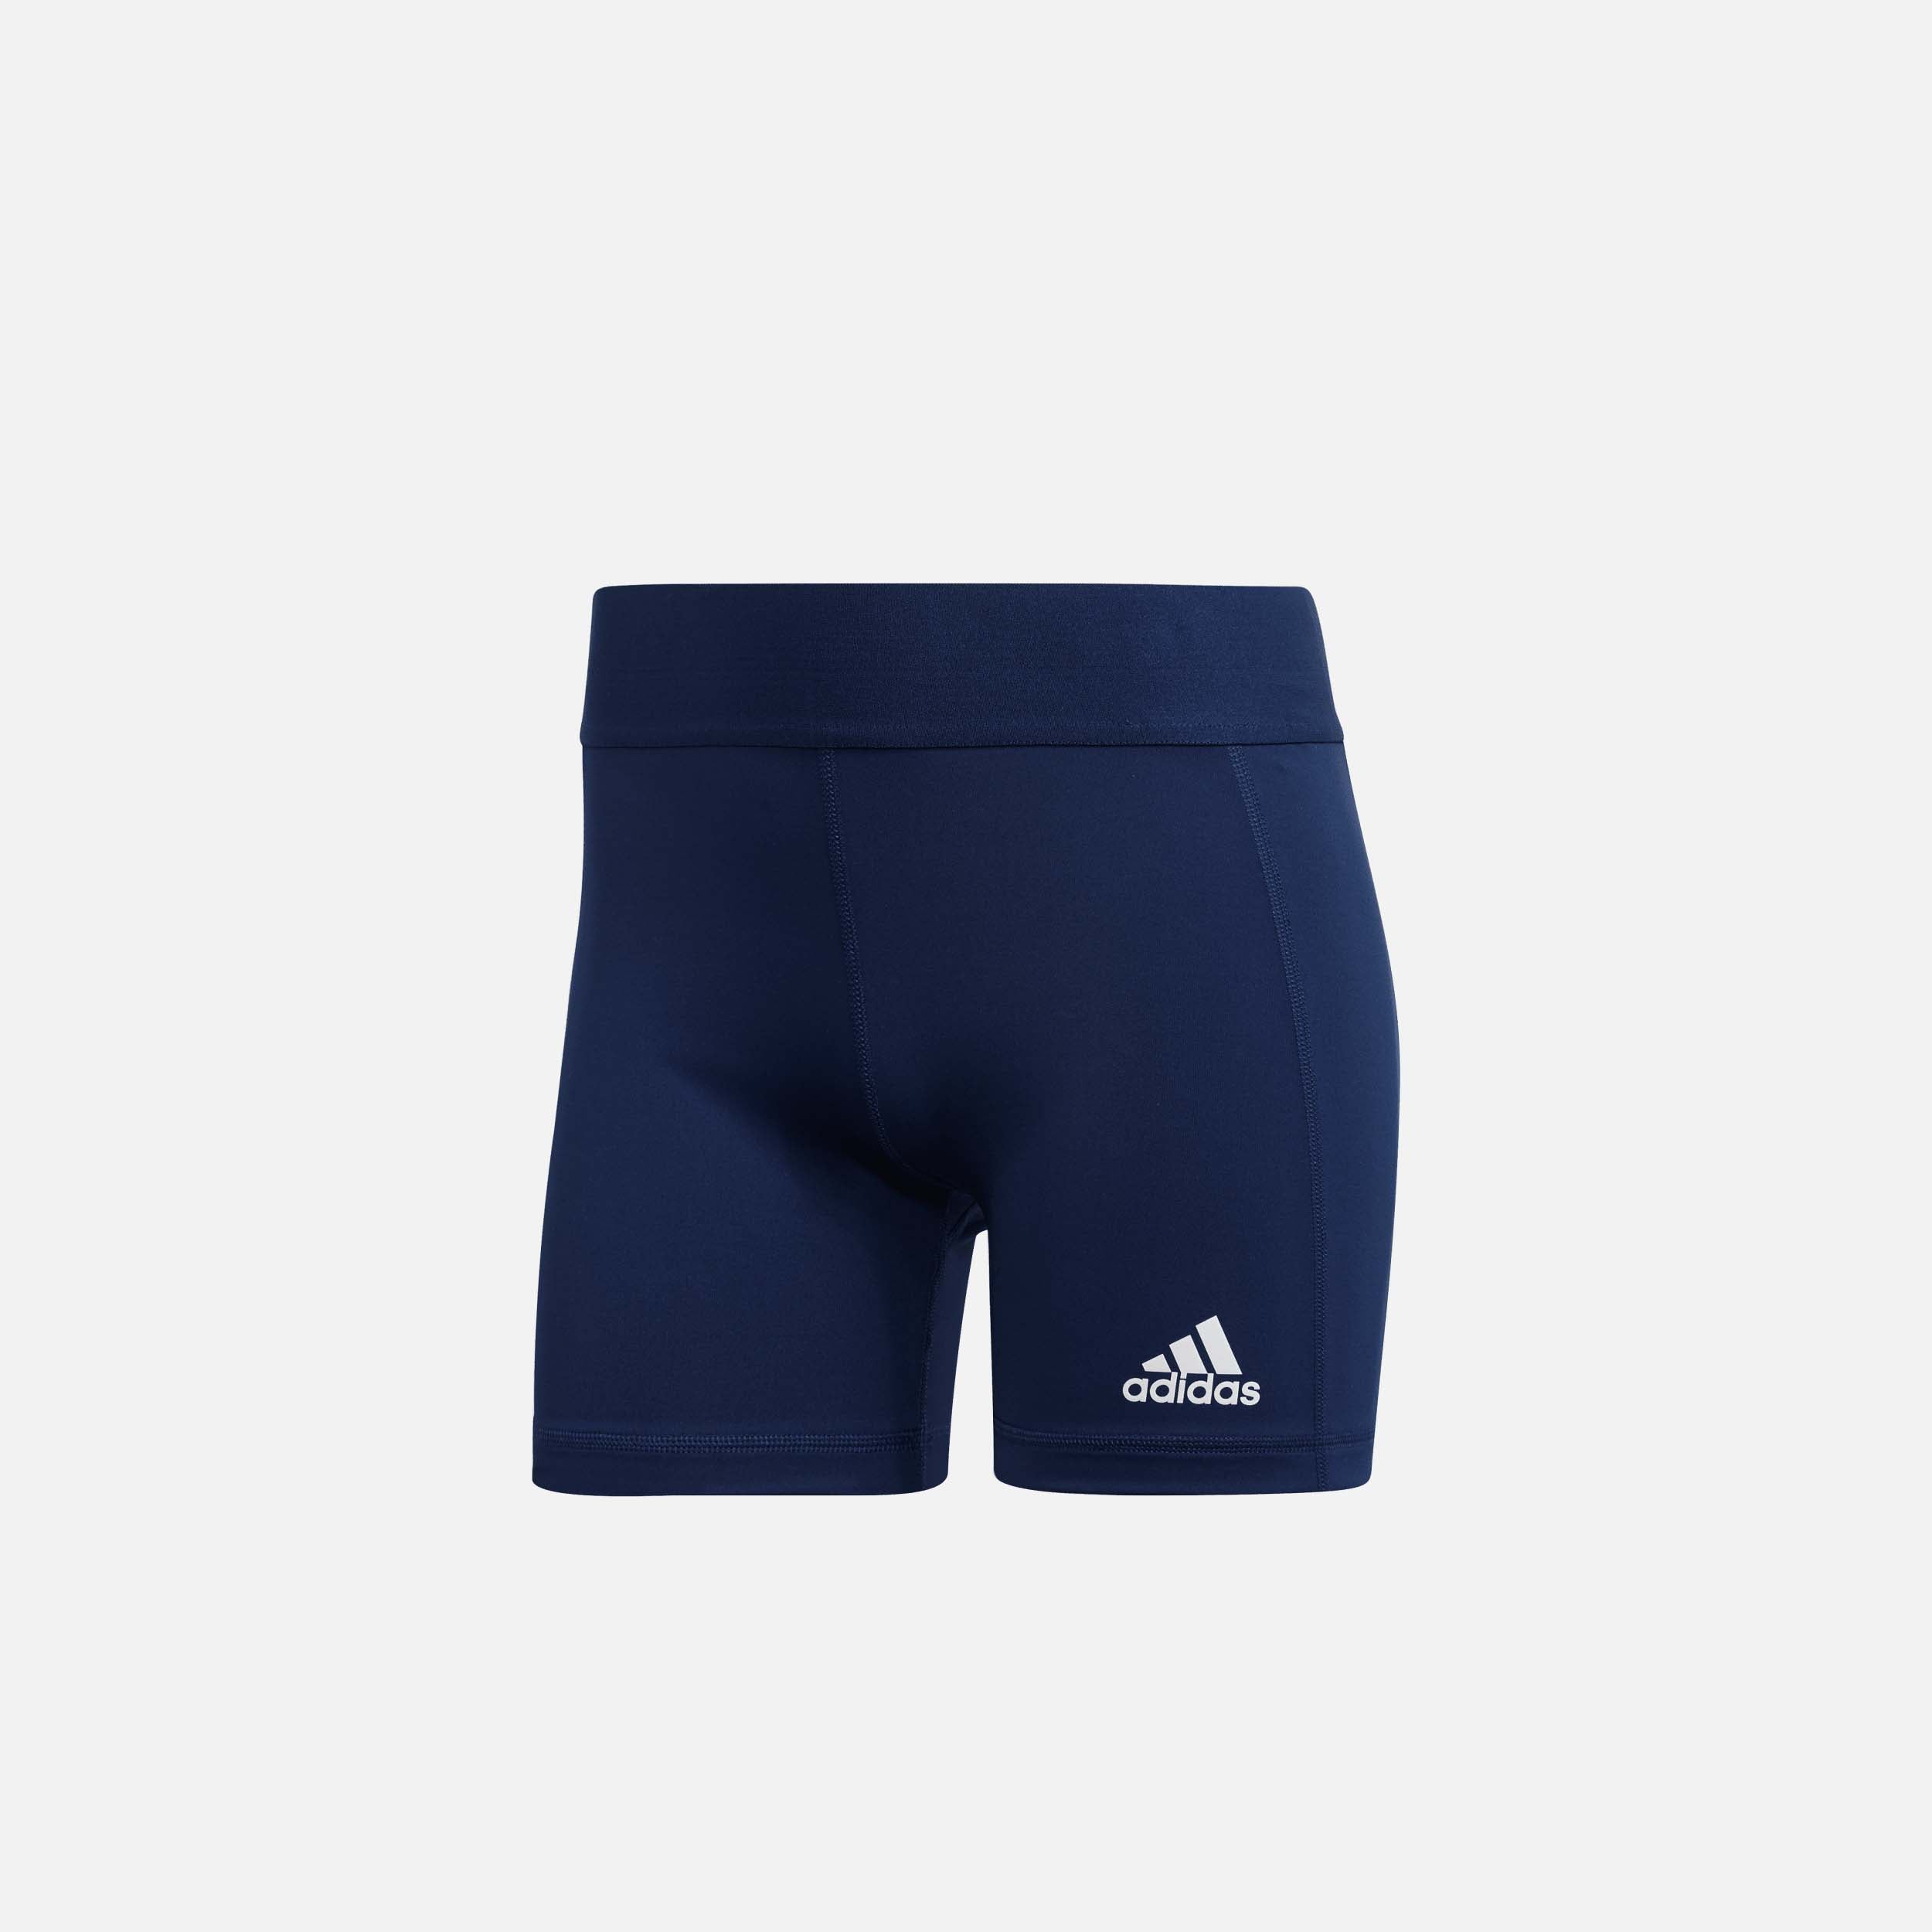 adidas Women's Techfit Volleyball Shorts 5 in